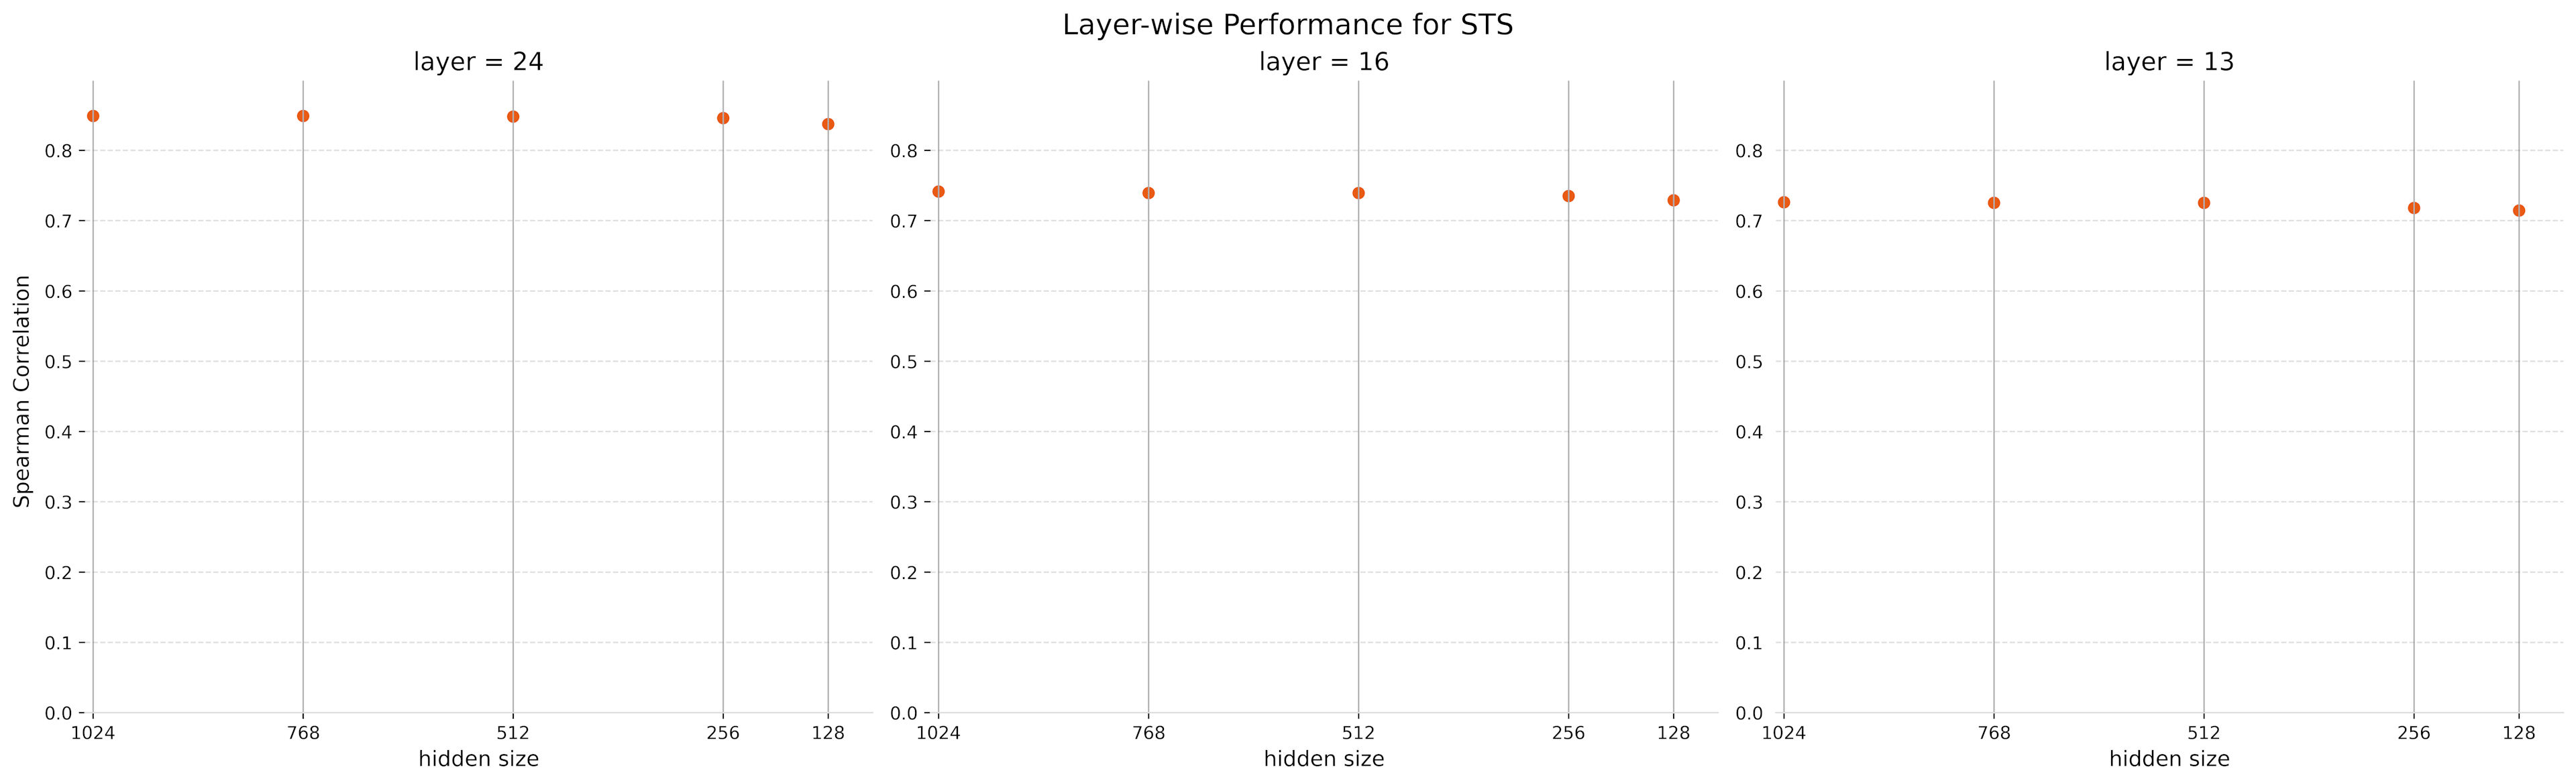 Model performance for 24, 16, and 13 layers and different embeddings sizes against the STS benchmark